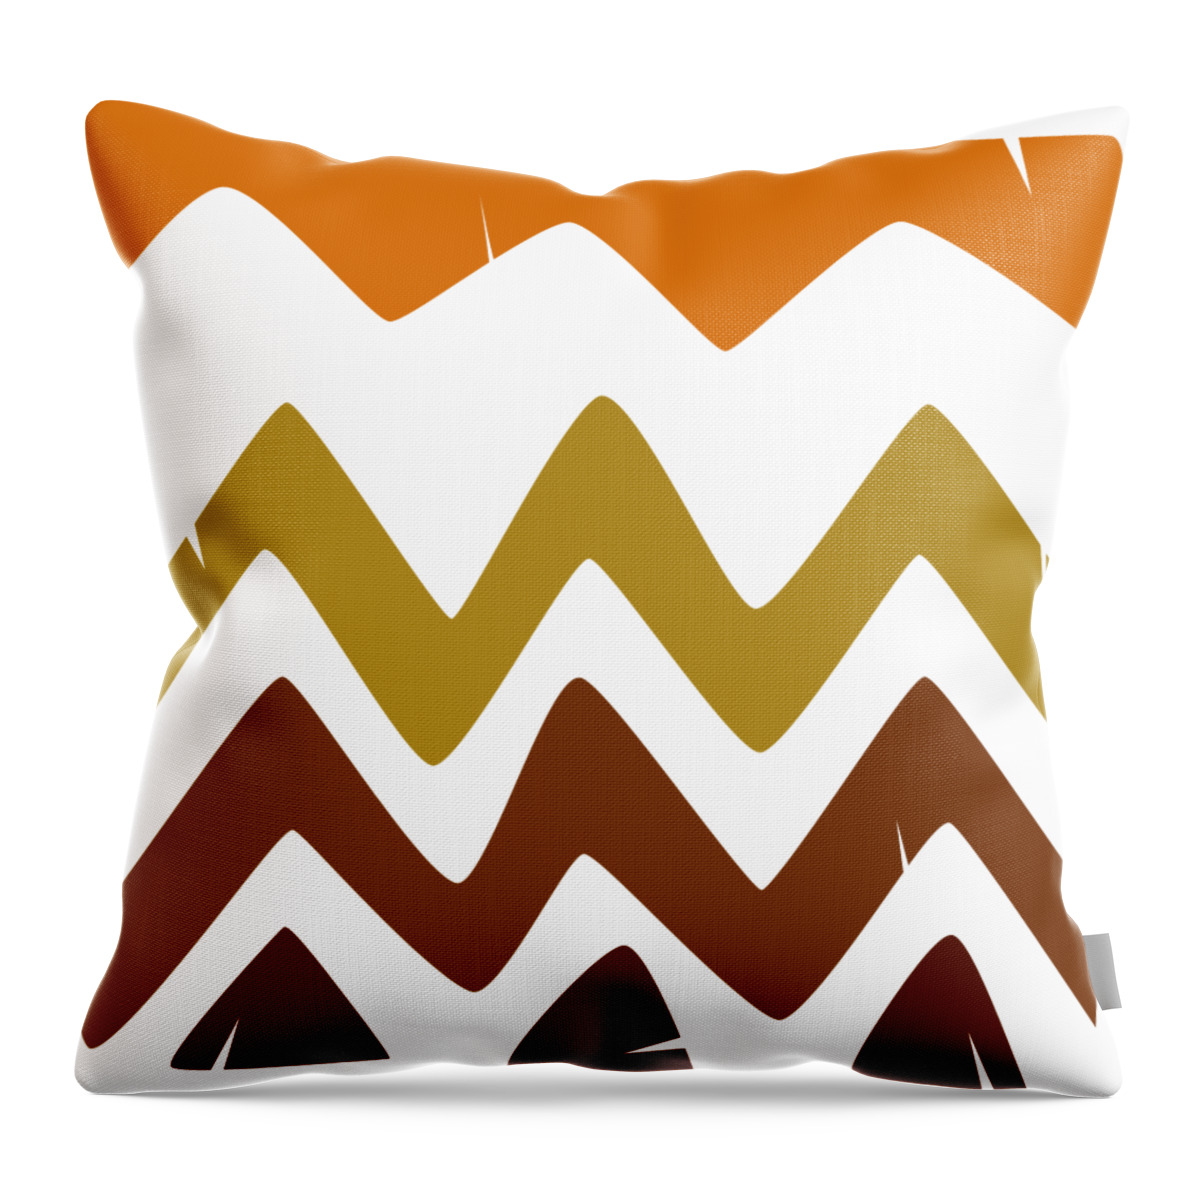 Abstract Throw Pillow featuring the drawing Abstract Retro shapes Set, Hand Painted Tribal Shapes, Retro Classic Colors, No 01 by Mounir Khalfouf